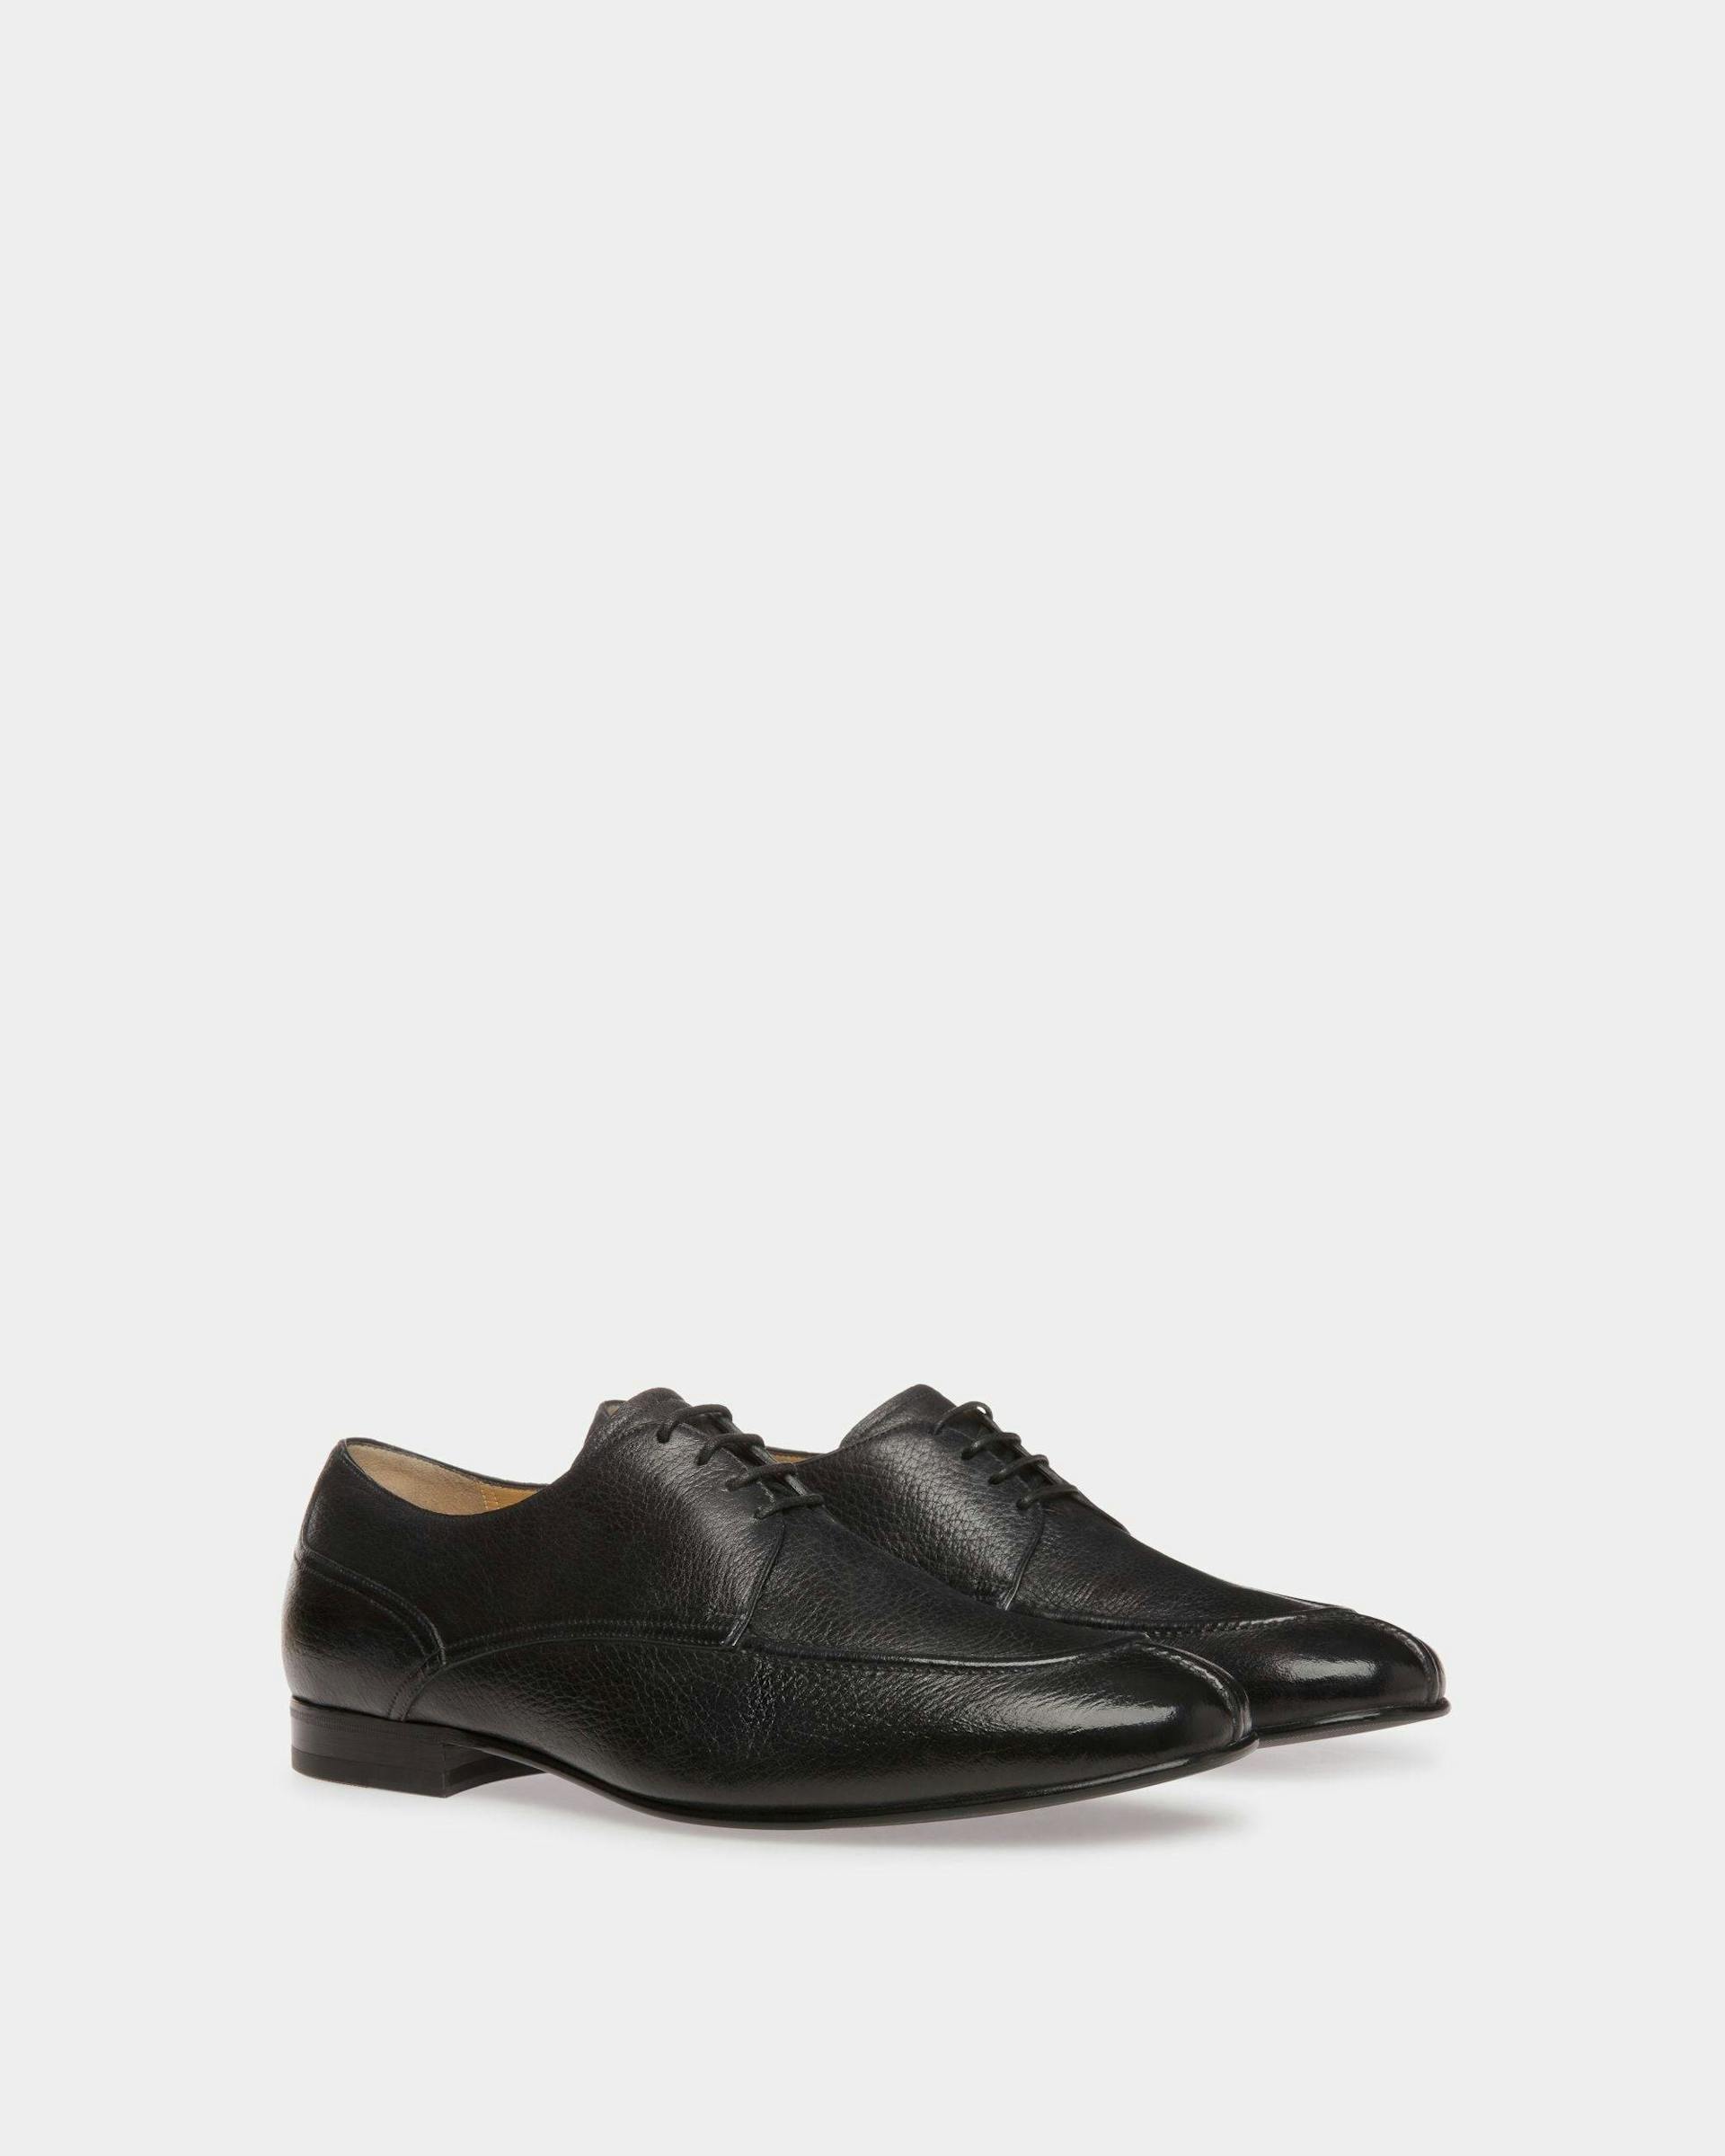 Men's Suisse Derby Shoes In Black Leather | Bally | Still Life 3/4 Front